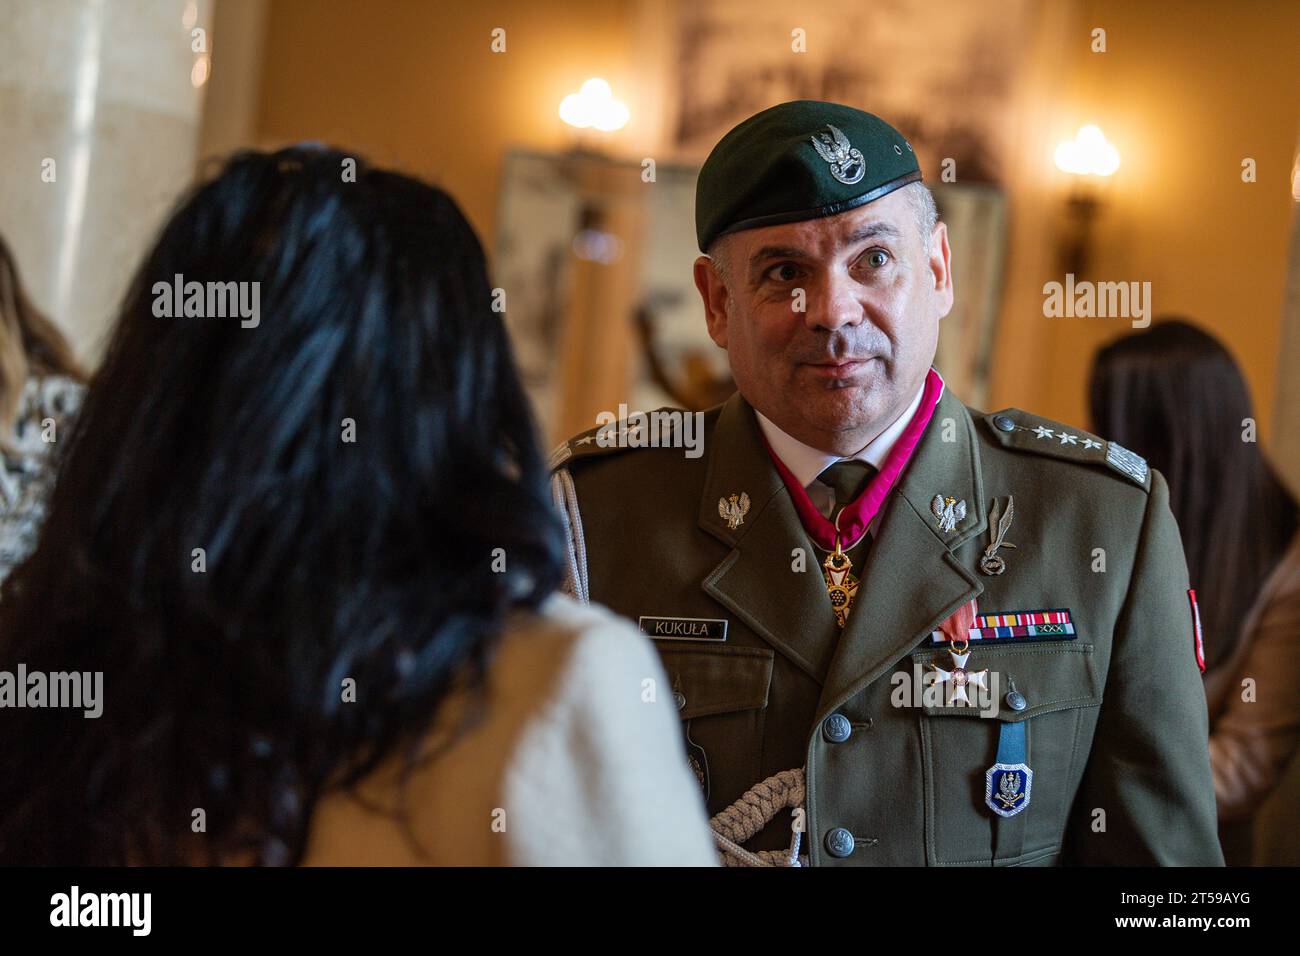 Arlington, United States Of America. 02nd Nov, 2023. Arlington, United States of America. 02 November, 2023. Chief of the General Staff of the Polish Armed Forces, Lt. Gen. Wieslaw Kukula, right, listens to the Executive Director of Army National Military Cemeteries, Karen Durham-Aguilera, left, inside the Memorial Amphitheater at Arlington National Cemetery, November 2, 2023 in Arlington, Virginia, USA. Credit: Henry Villarama/U.S. Army/Alamy Live News Stock Photo